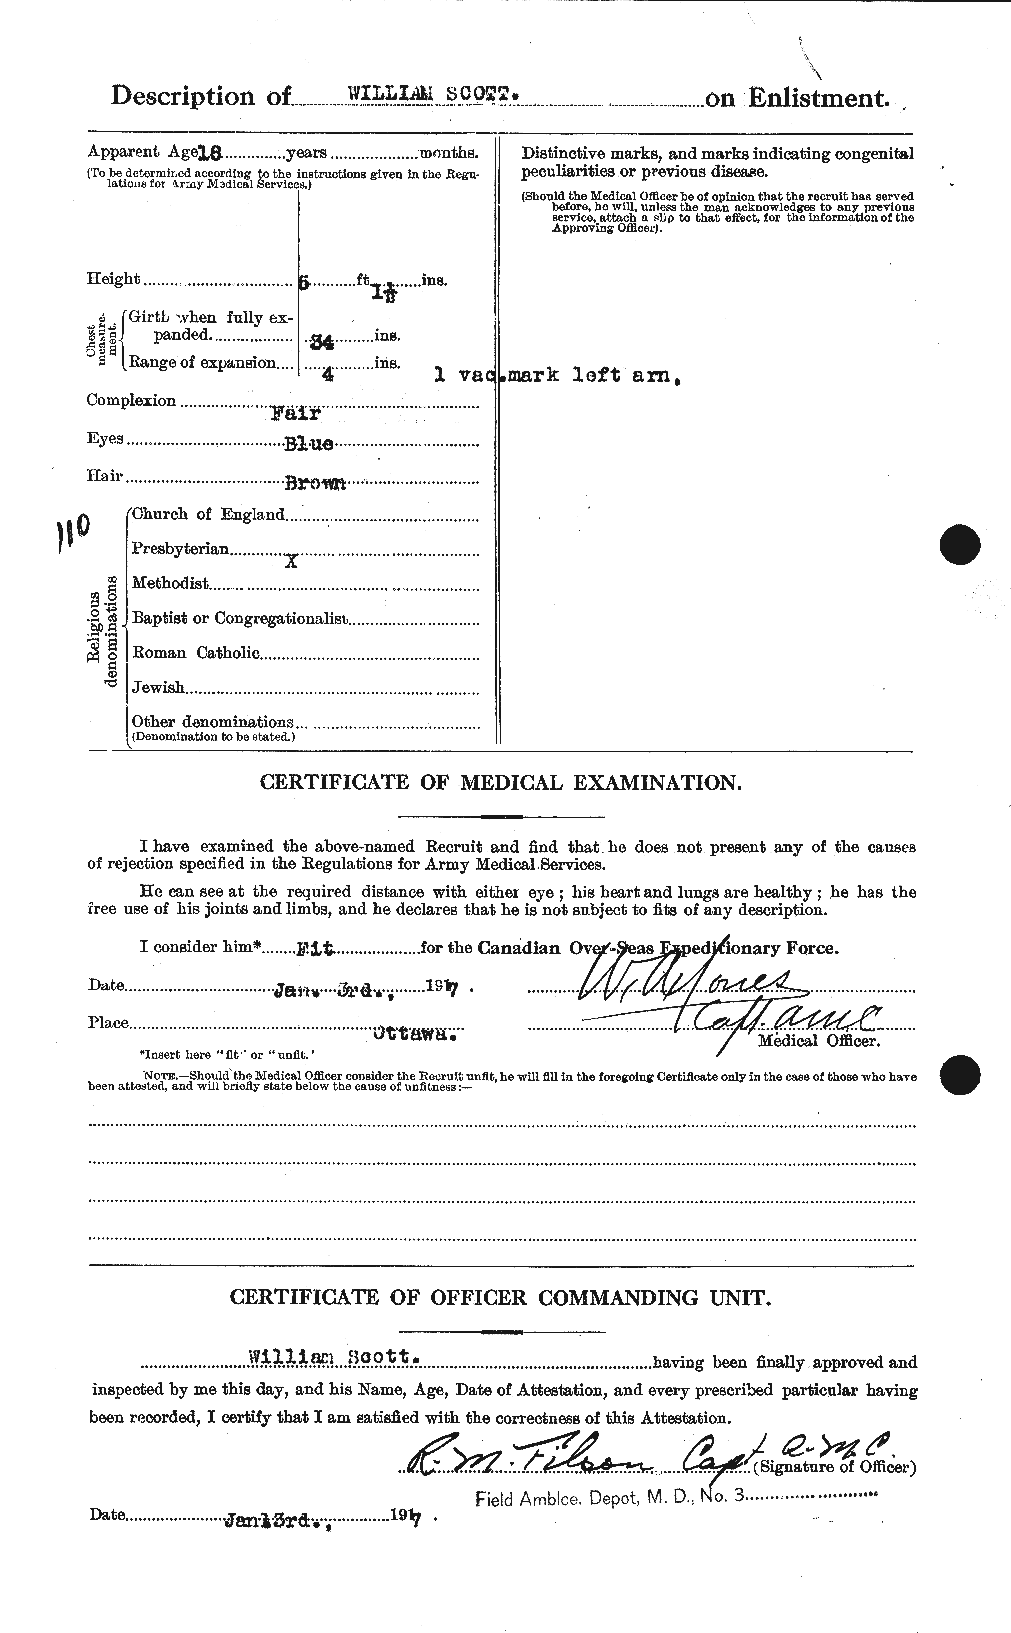 Personnel Records of the First World War - CEF 087658b